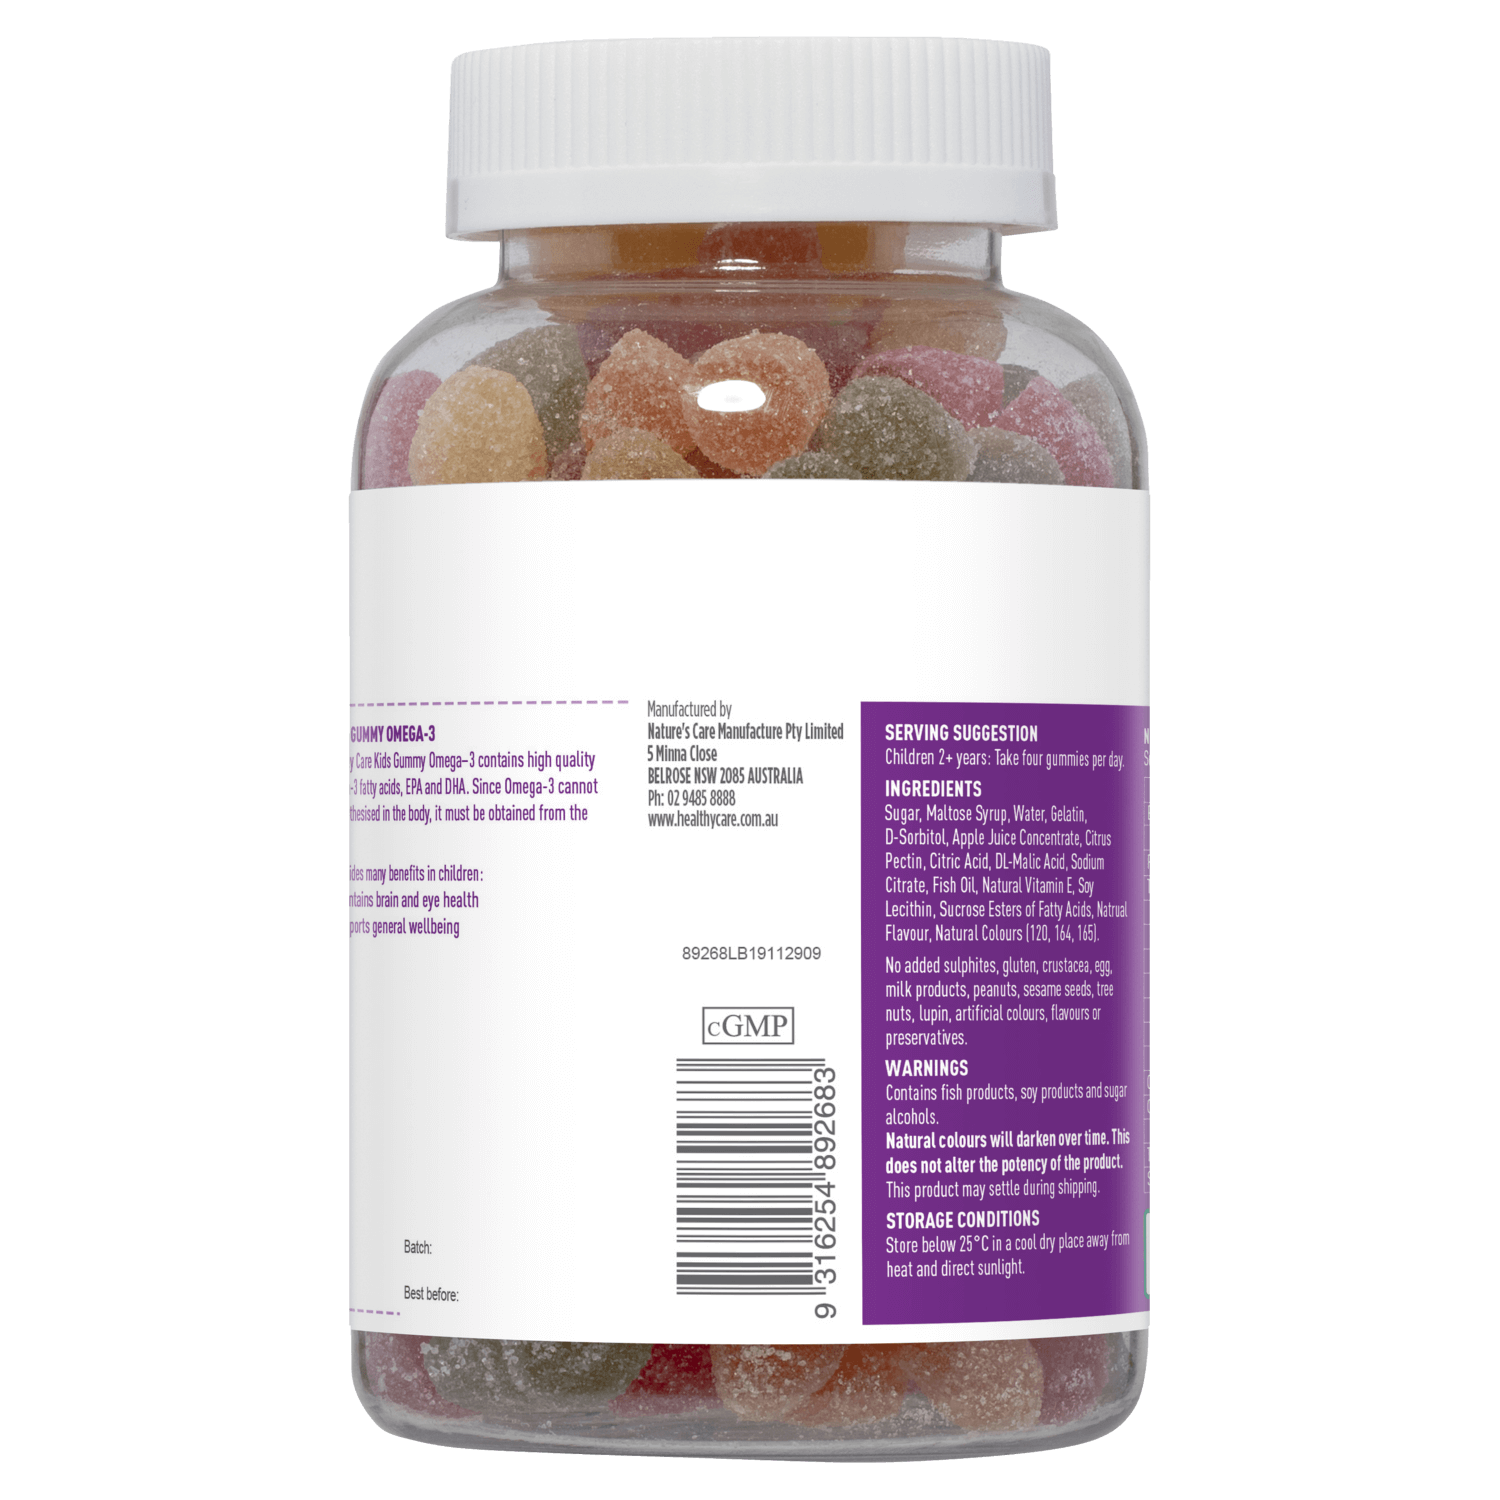 Gummies Omega-3 (Manufacturer and Barcode)-Vitamins & Supplements-Healthy Care Australia